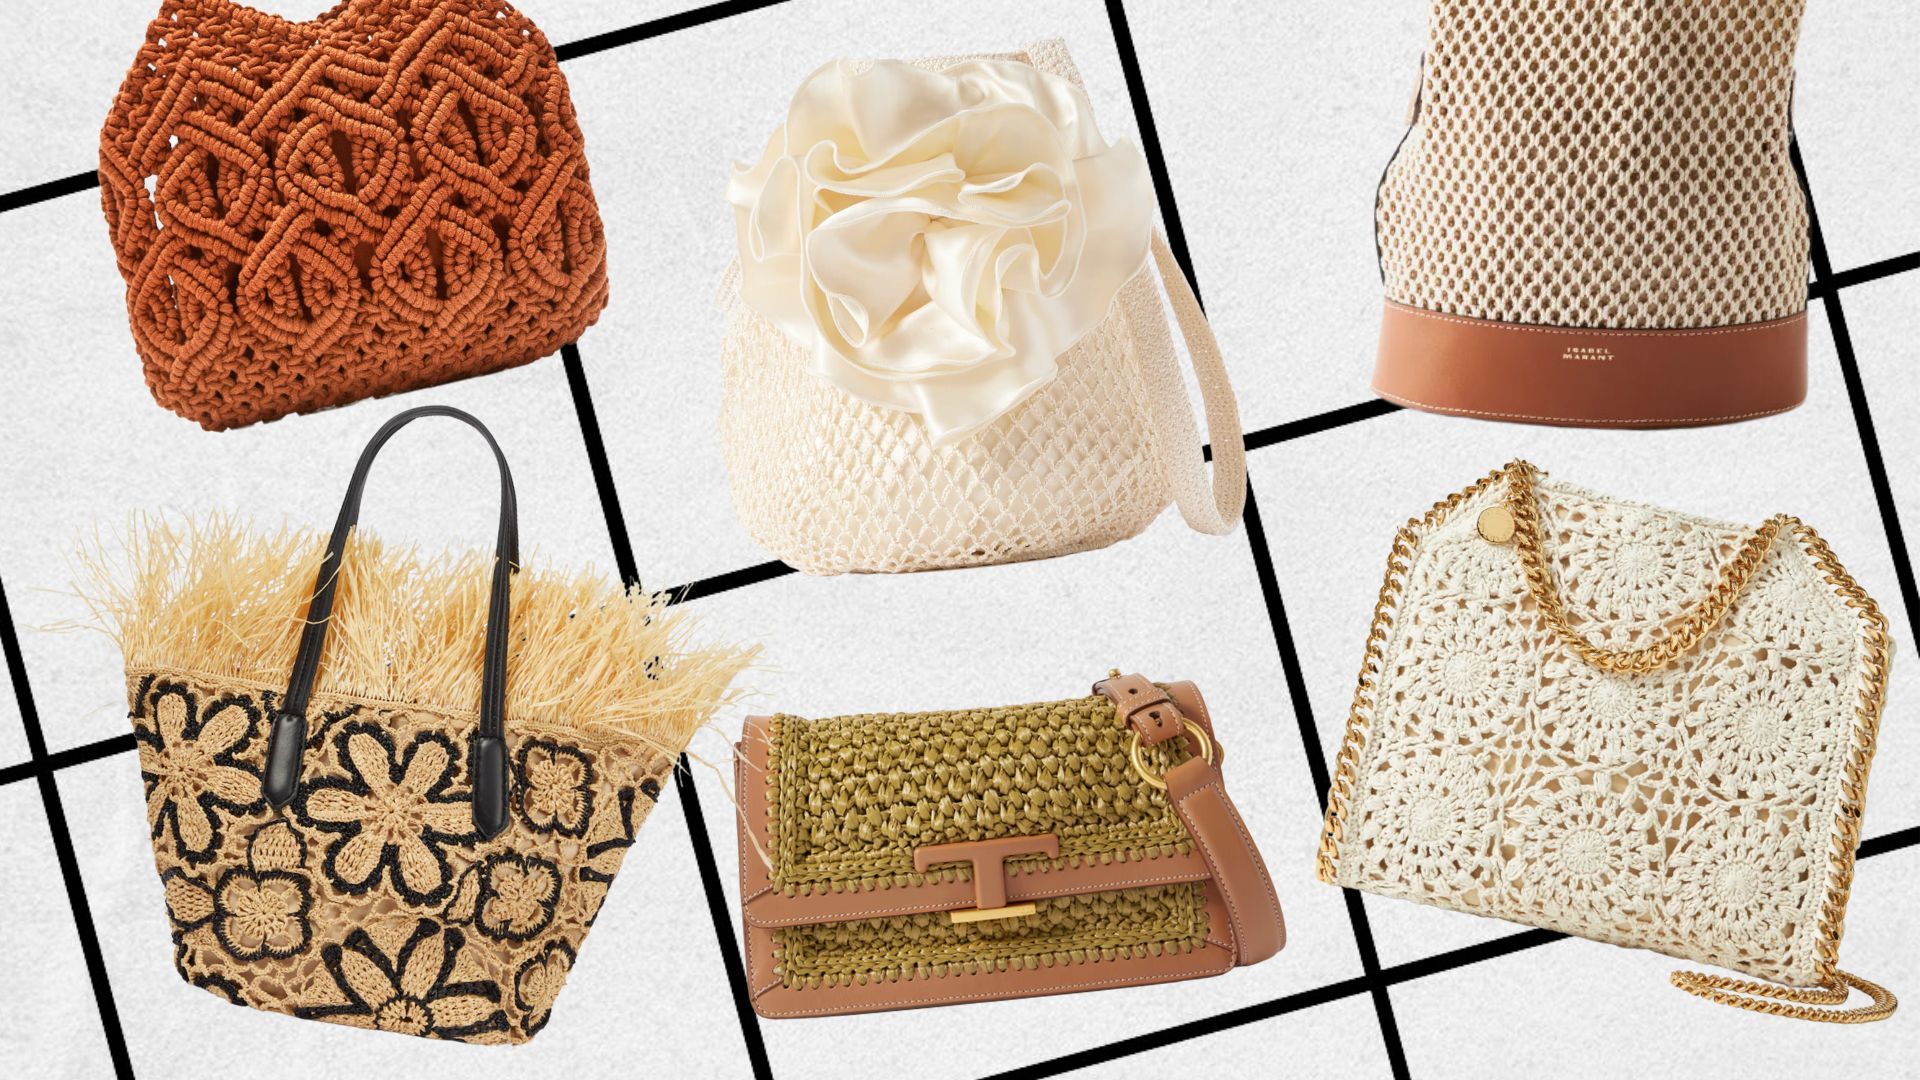 Where to Score The Hottest Designer Bags This Holiday Season - Mia